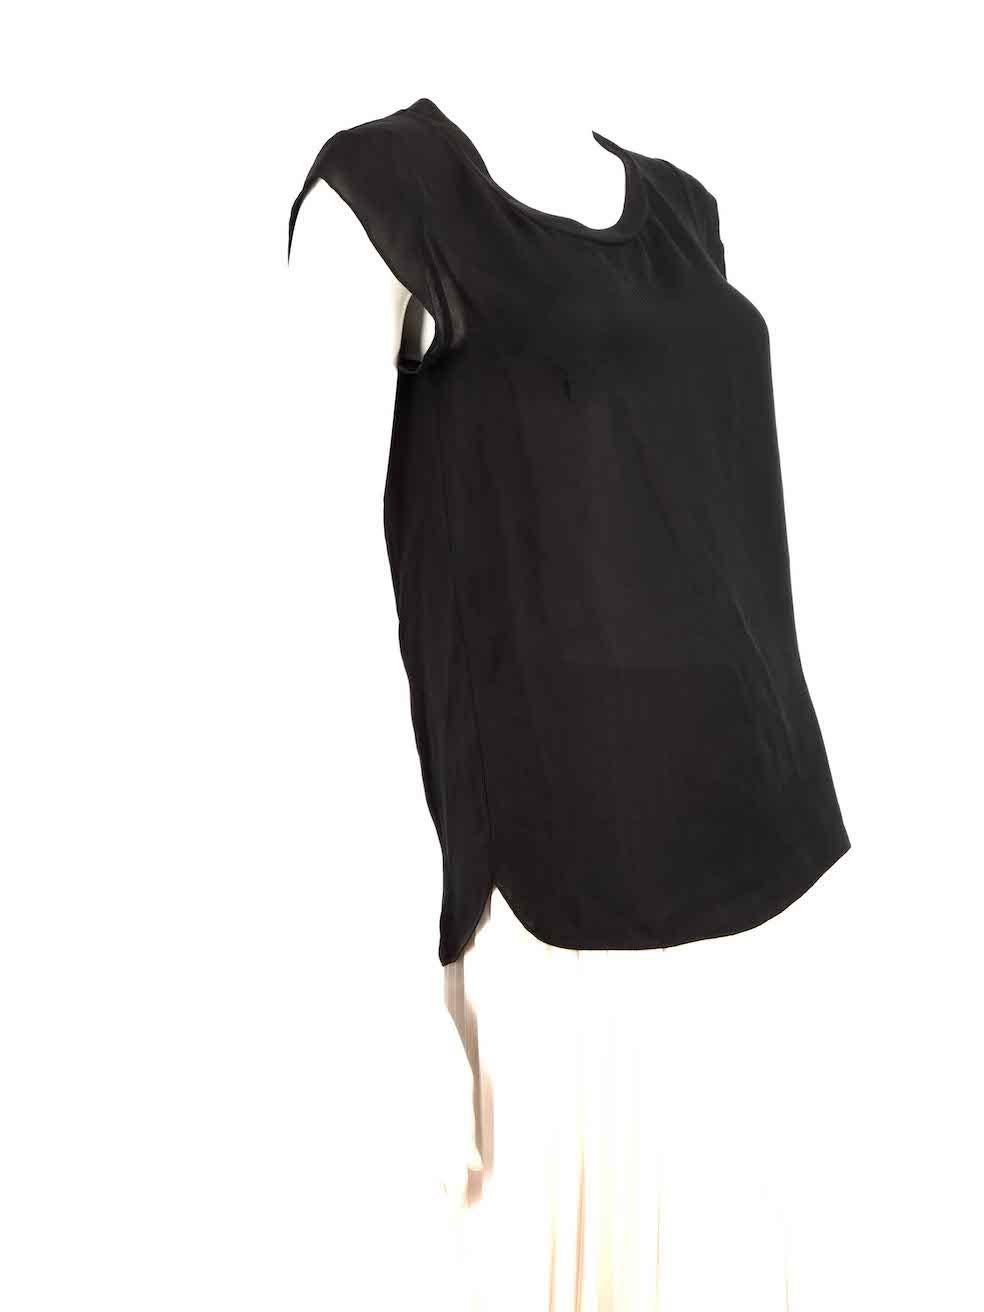 CONDITION is Very good. Minimal wear to top is evident. A small mark to the left side front on this used 3.1 Phillip Lim designer resale item.
 
 Details
 Black
 Silk
 Top
 Sheer
 Short sleeves
 Round neck
 
 
 Made in China
 
 Composition
 100%